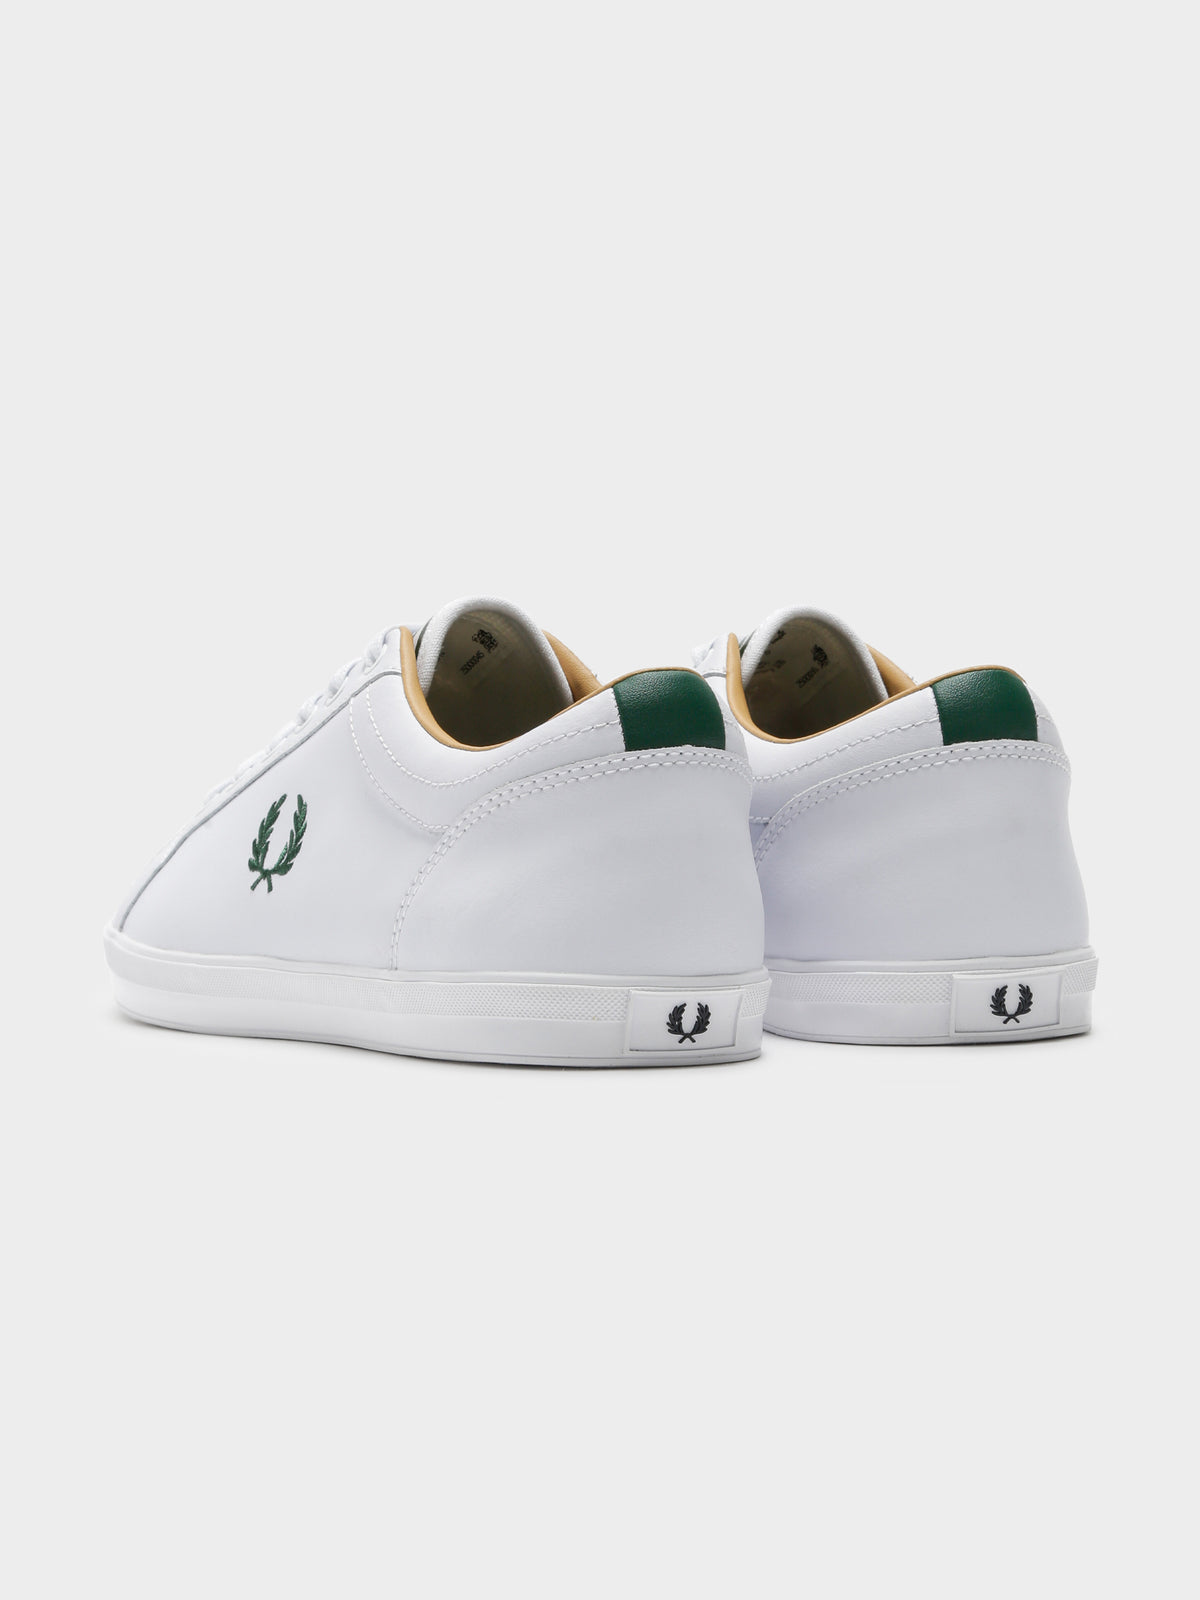 Baseline Leather Sneakers in White